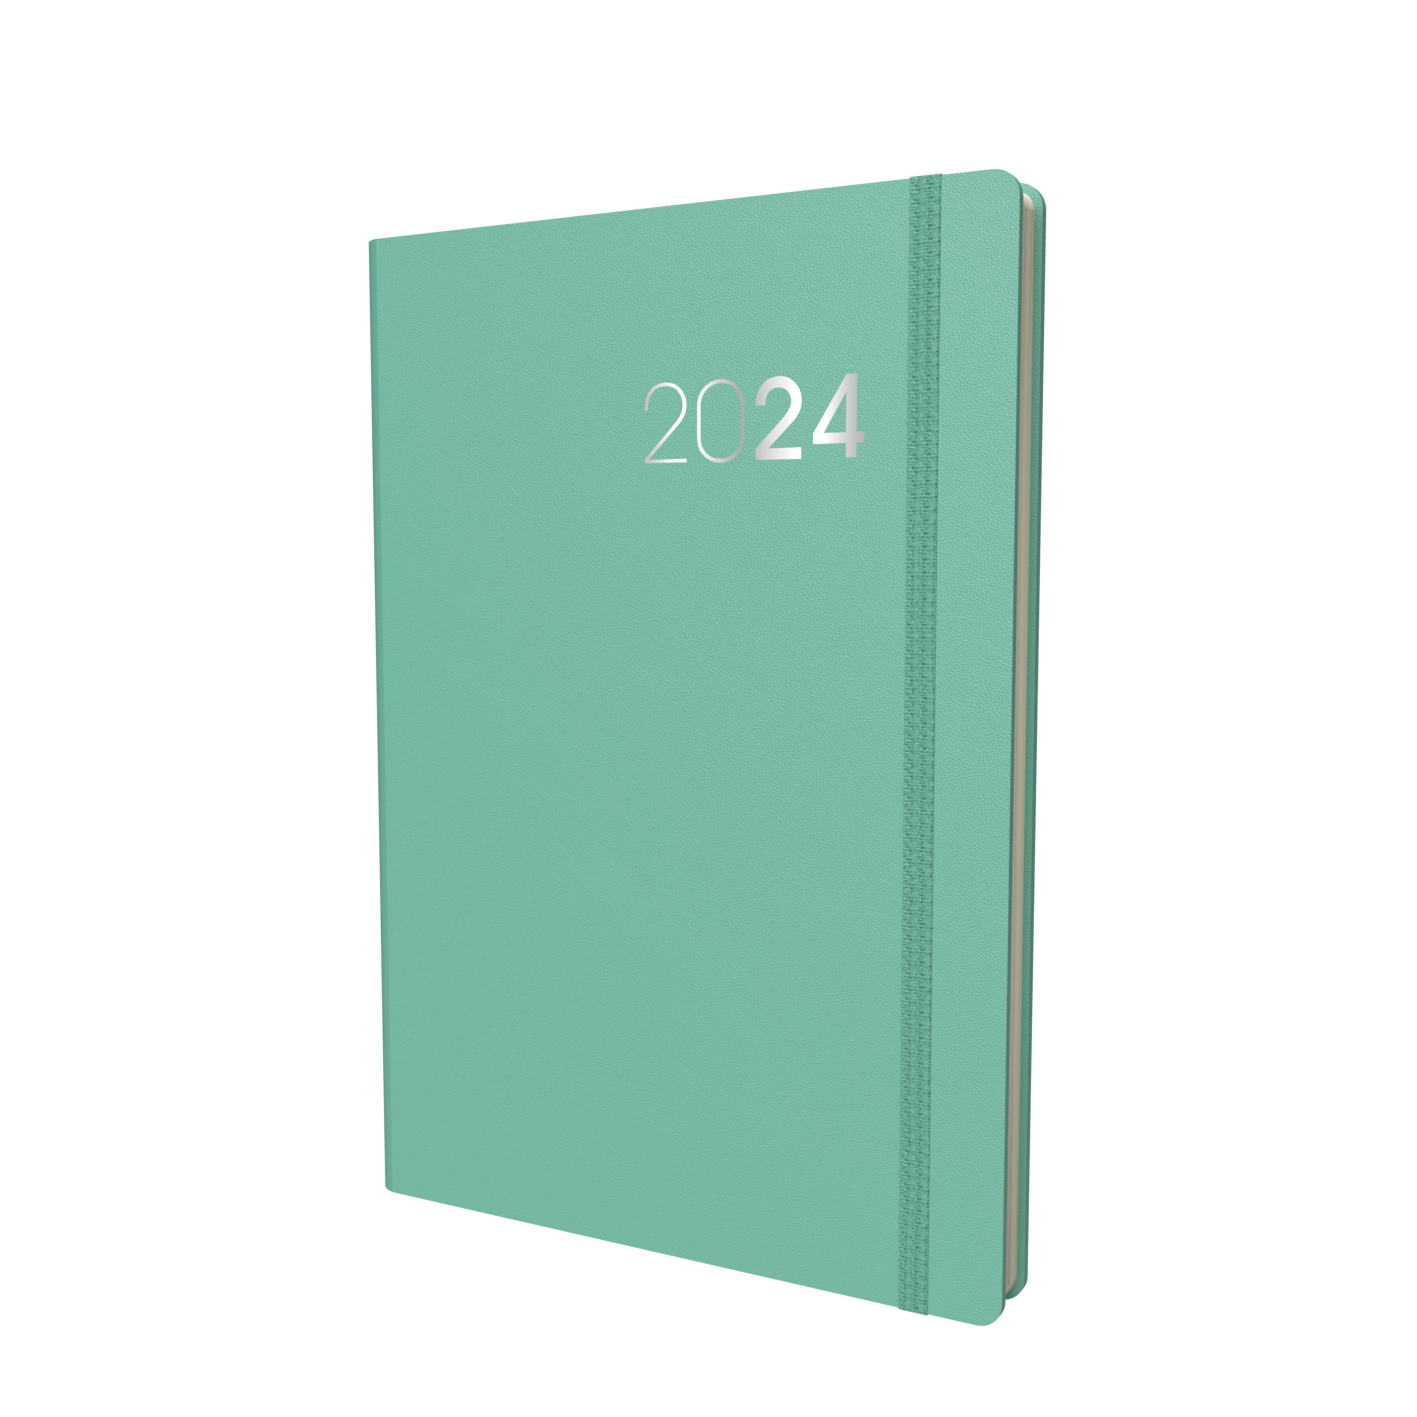 Collins Legacy 2024 Diary - Week to View